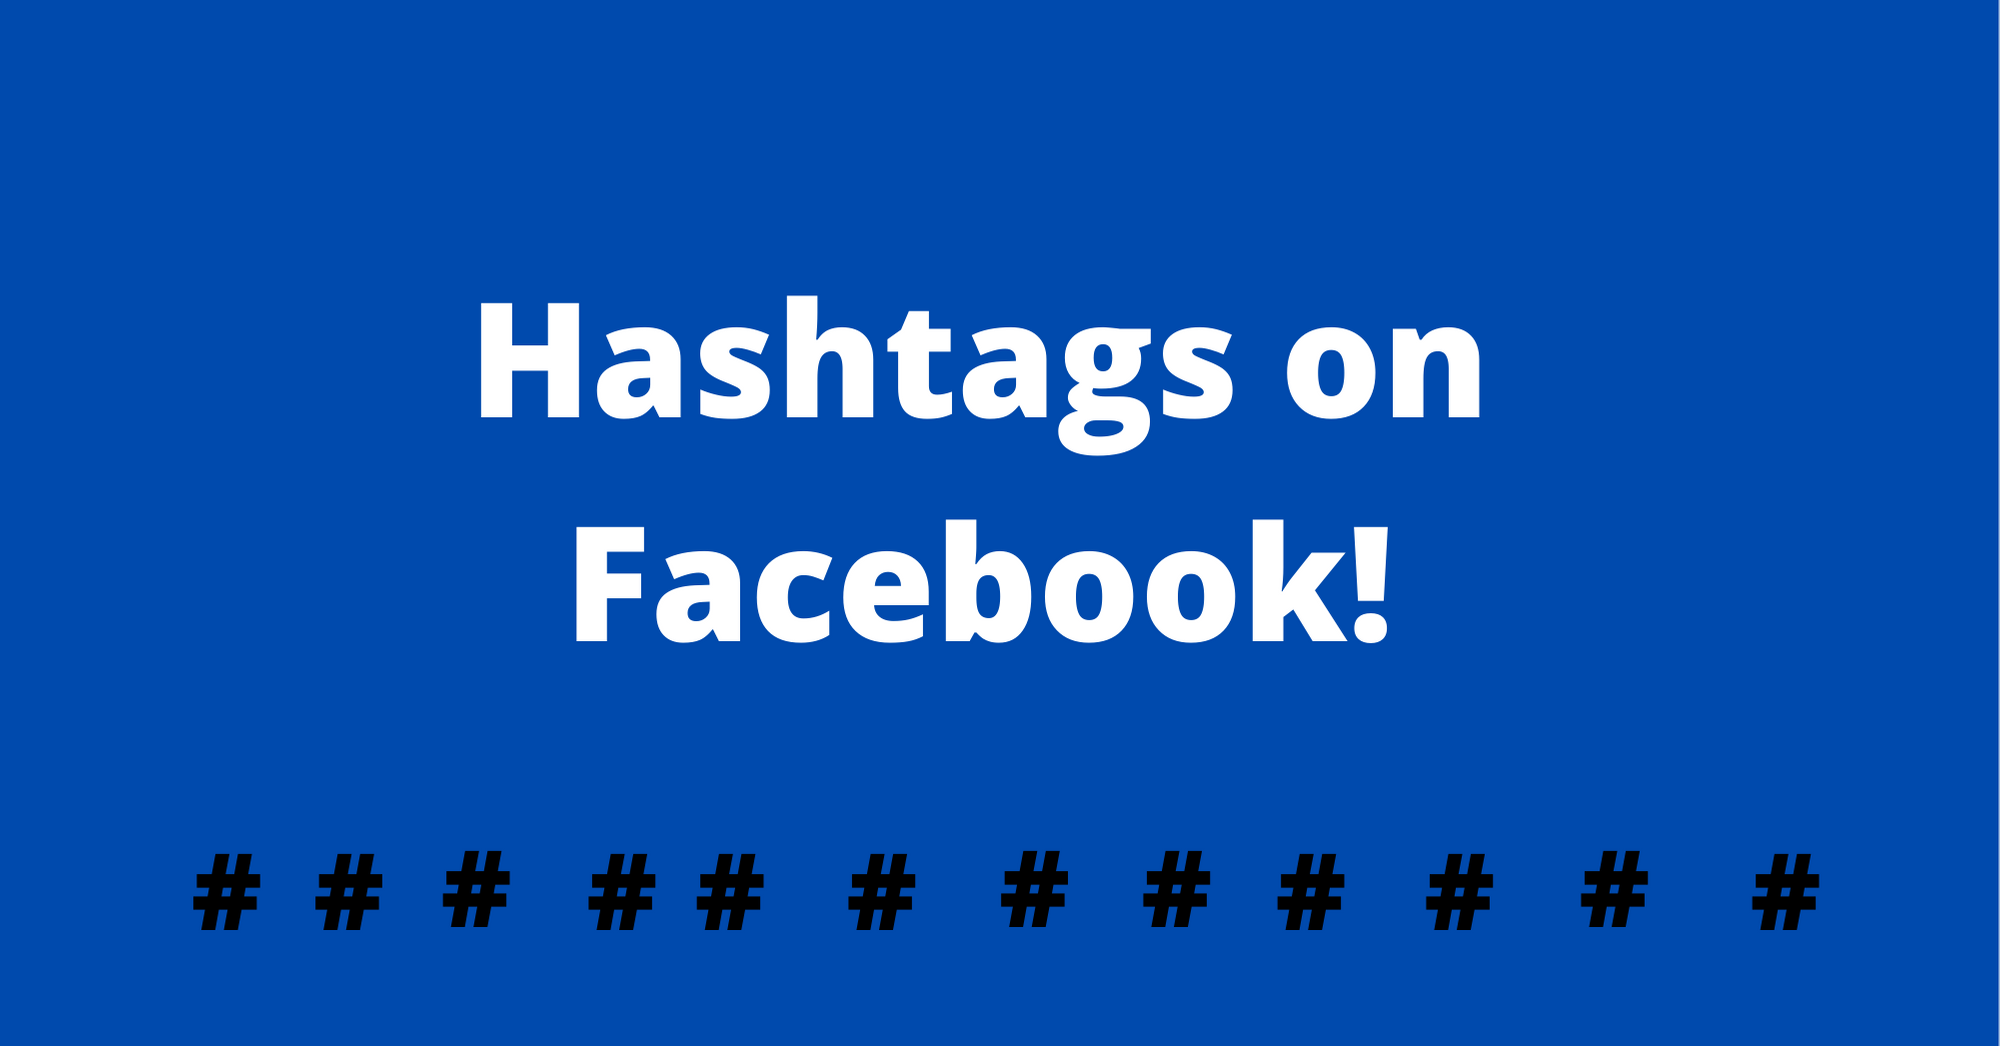 Should I use Hashtags on Facebook? Social Media Sussex